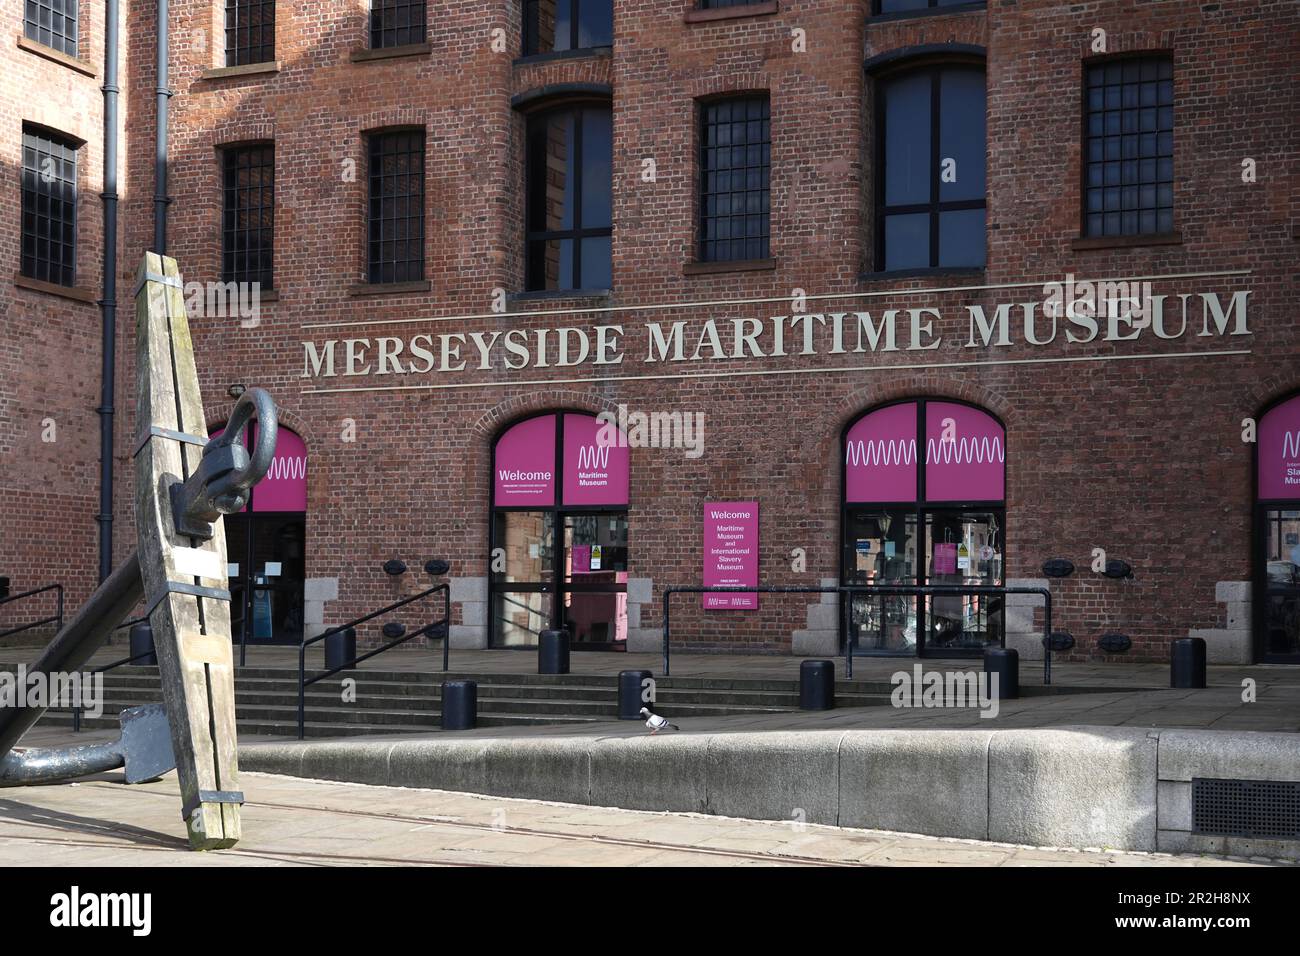 Merseyside Maritime Museum Liverpool on the Royal Albert Docks. Part of Liverpool waterfront. Stock Photo